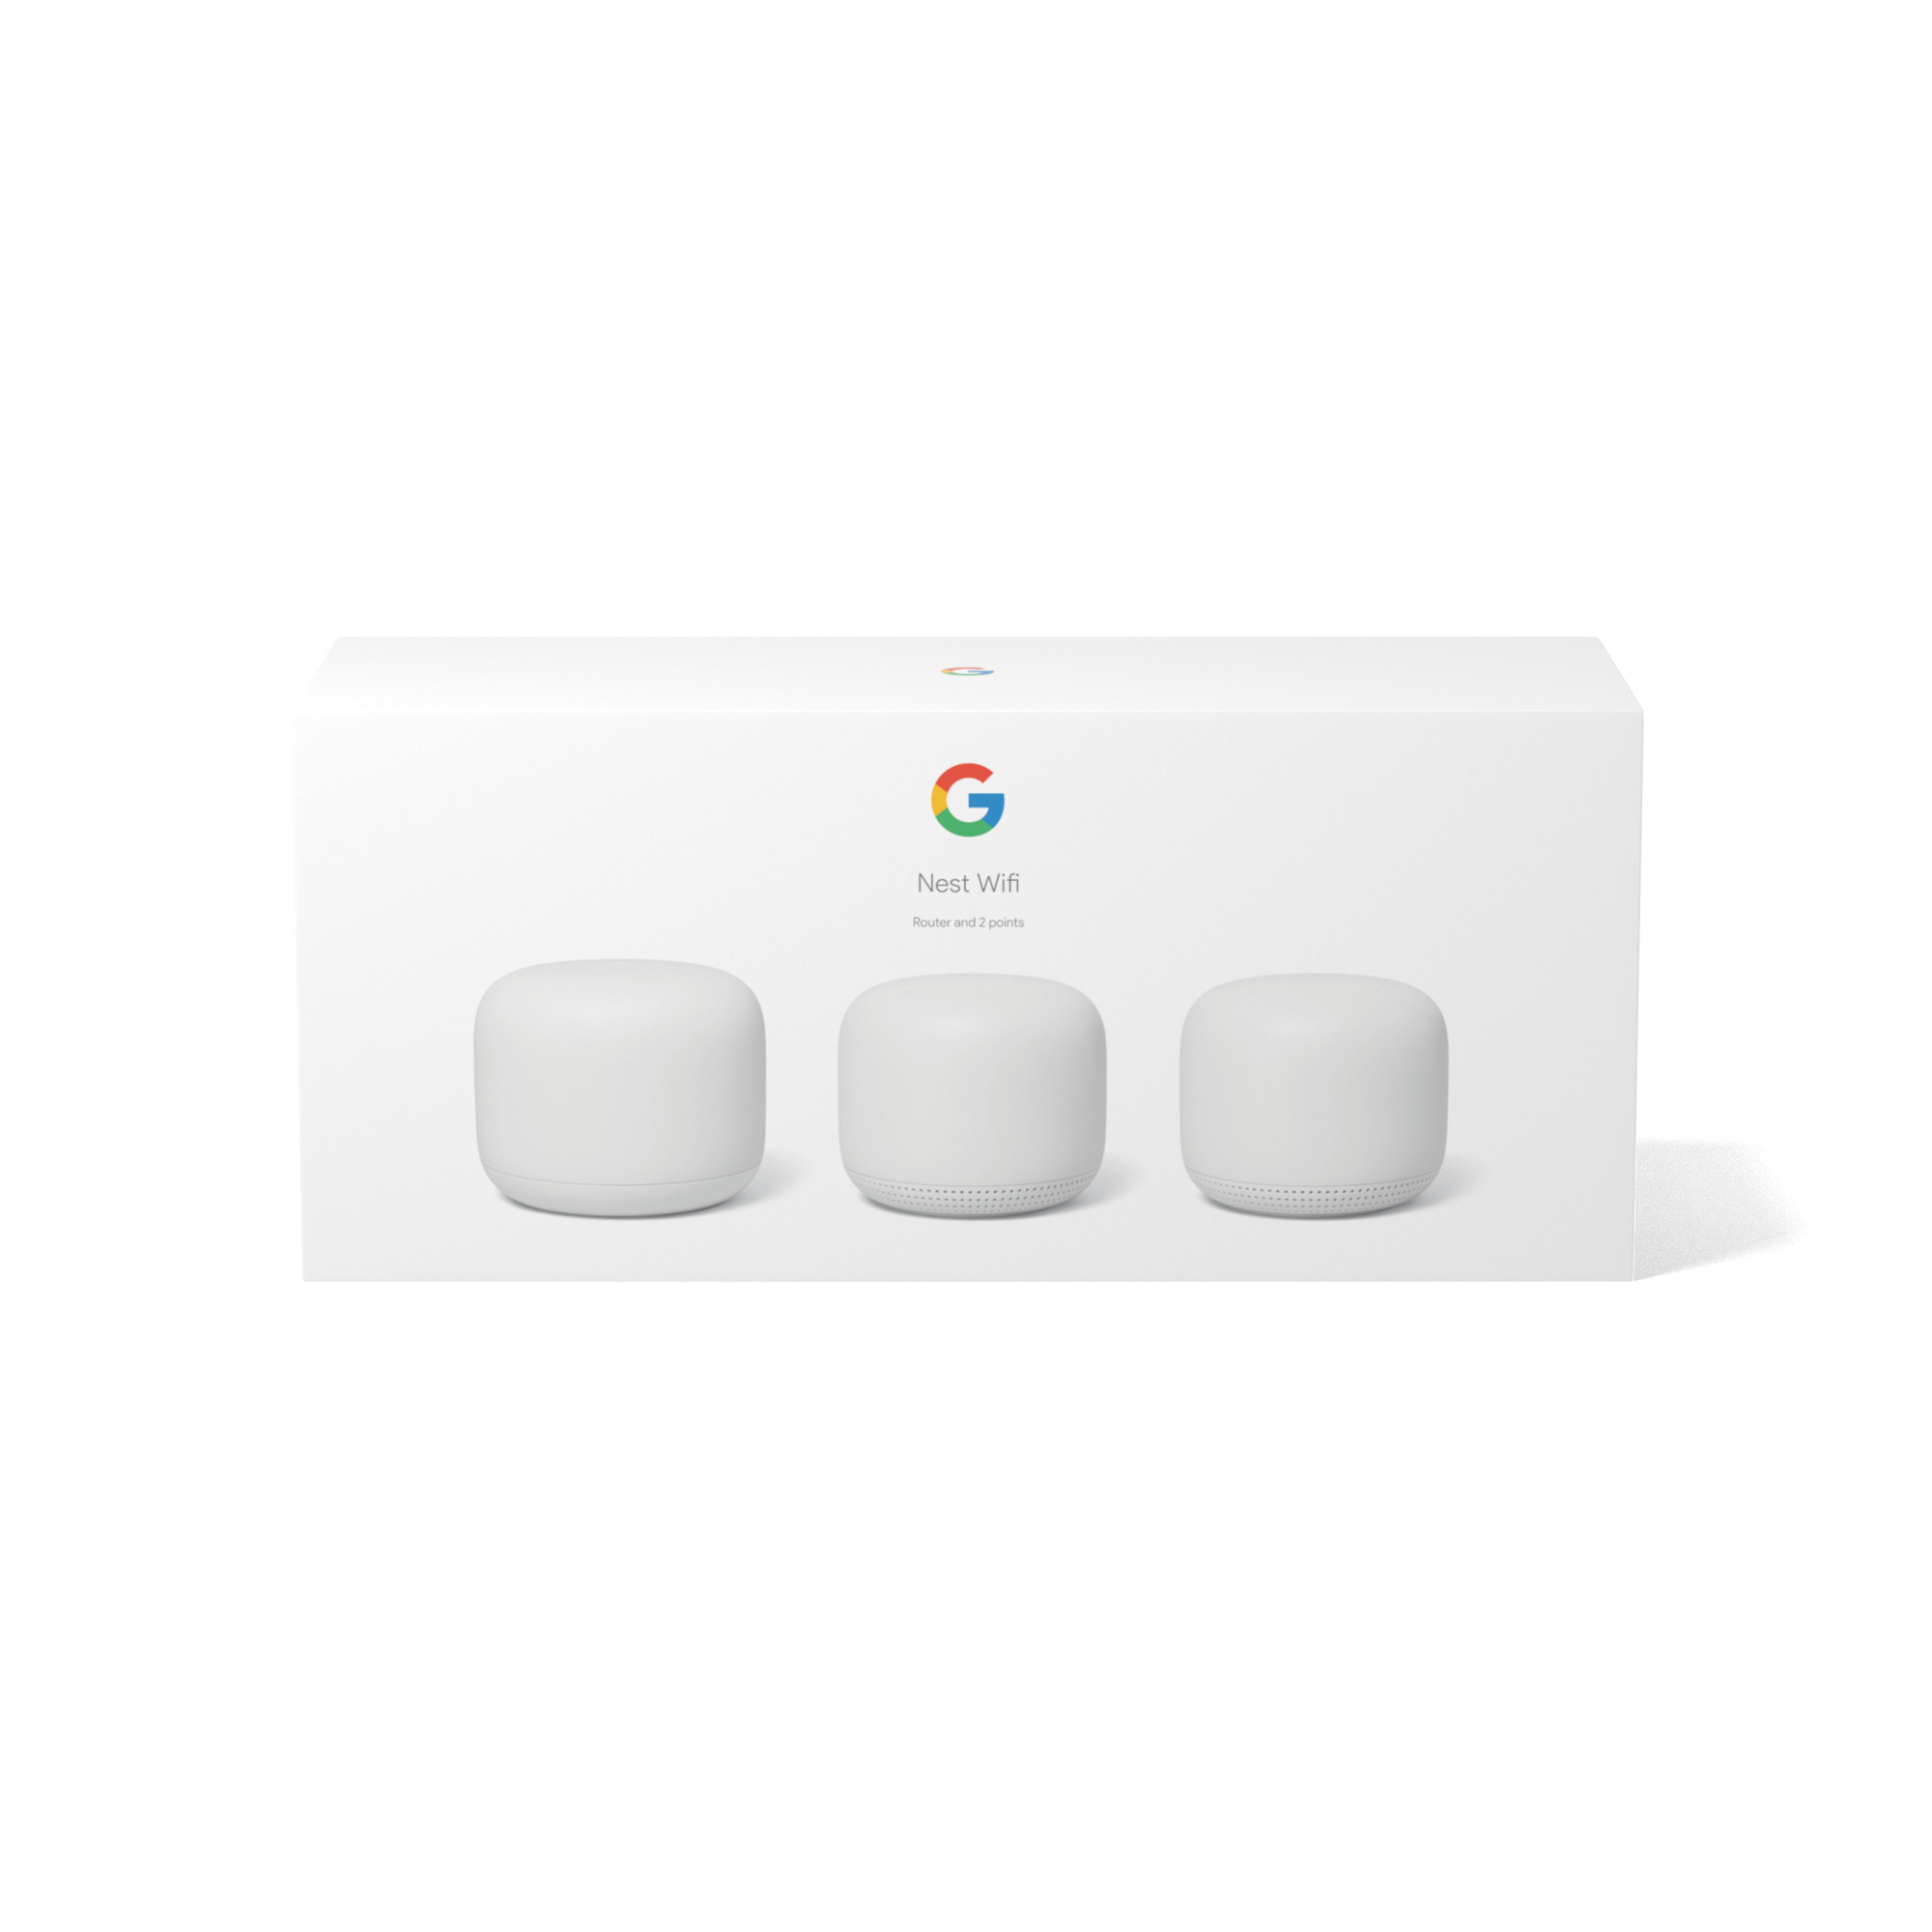 Google Nest Wifi 3 Pack (AC2200 Mesh Router with 2 Points) $174.99 at Walmart